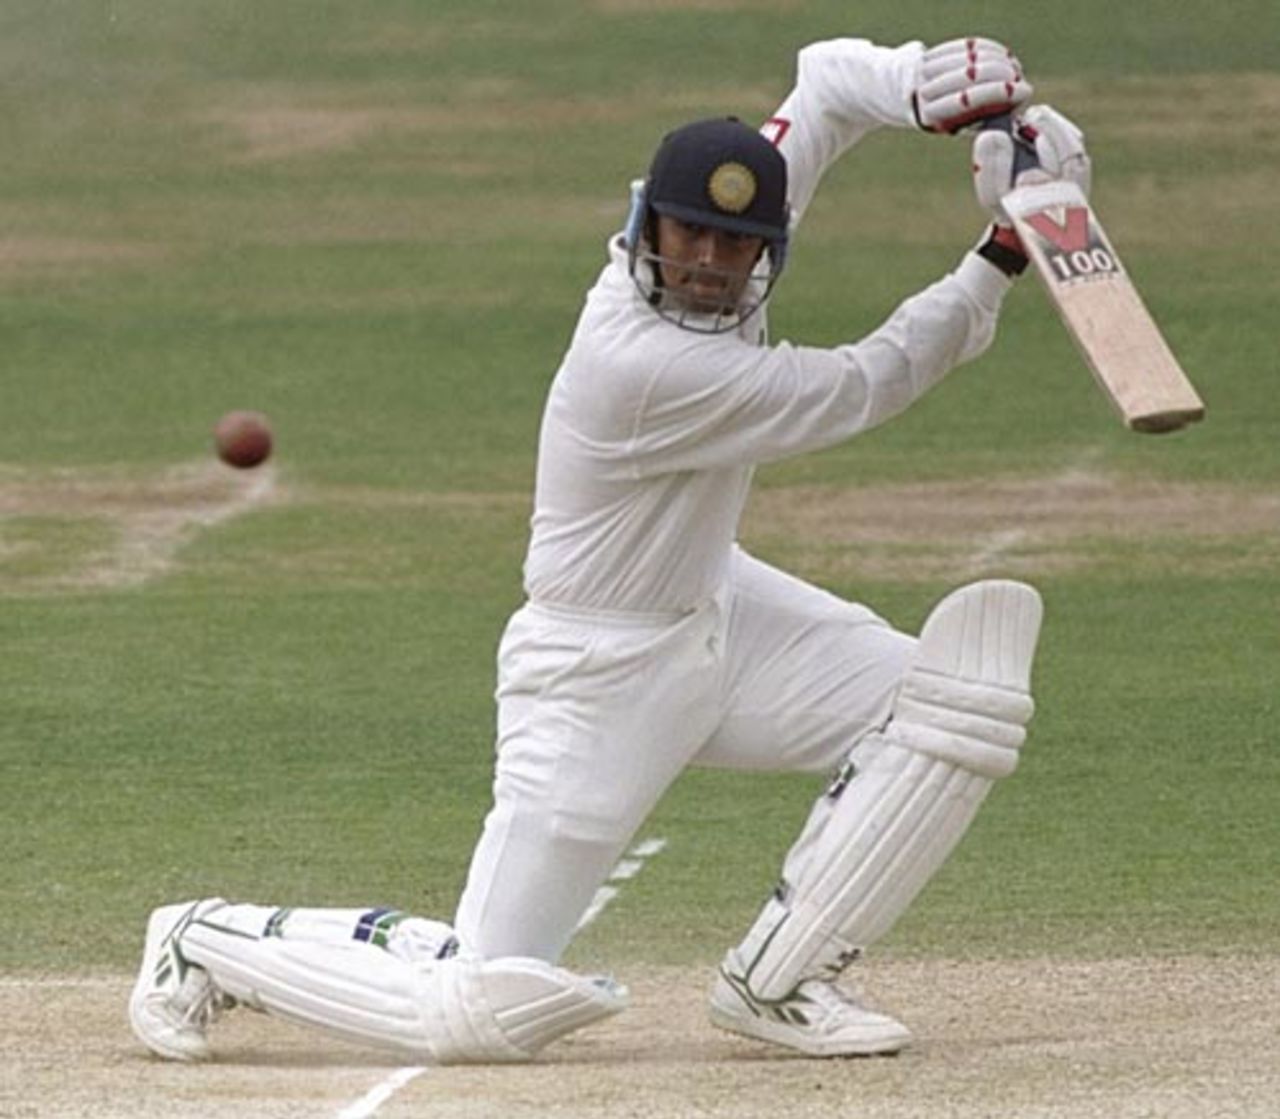 Rahul Dravid drives through point during his debut Test, England v India, 2nd Test, Lord's, 3rd day, June 22, 1996